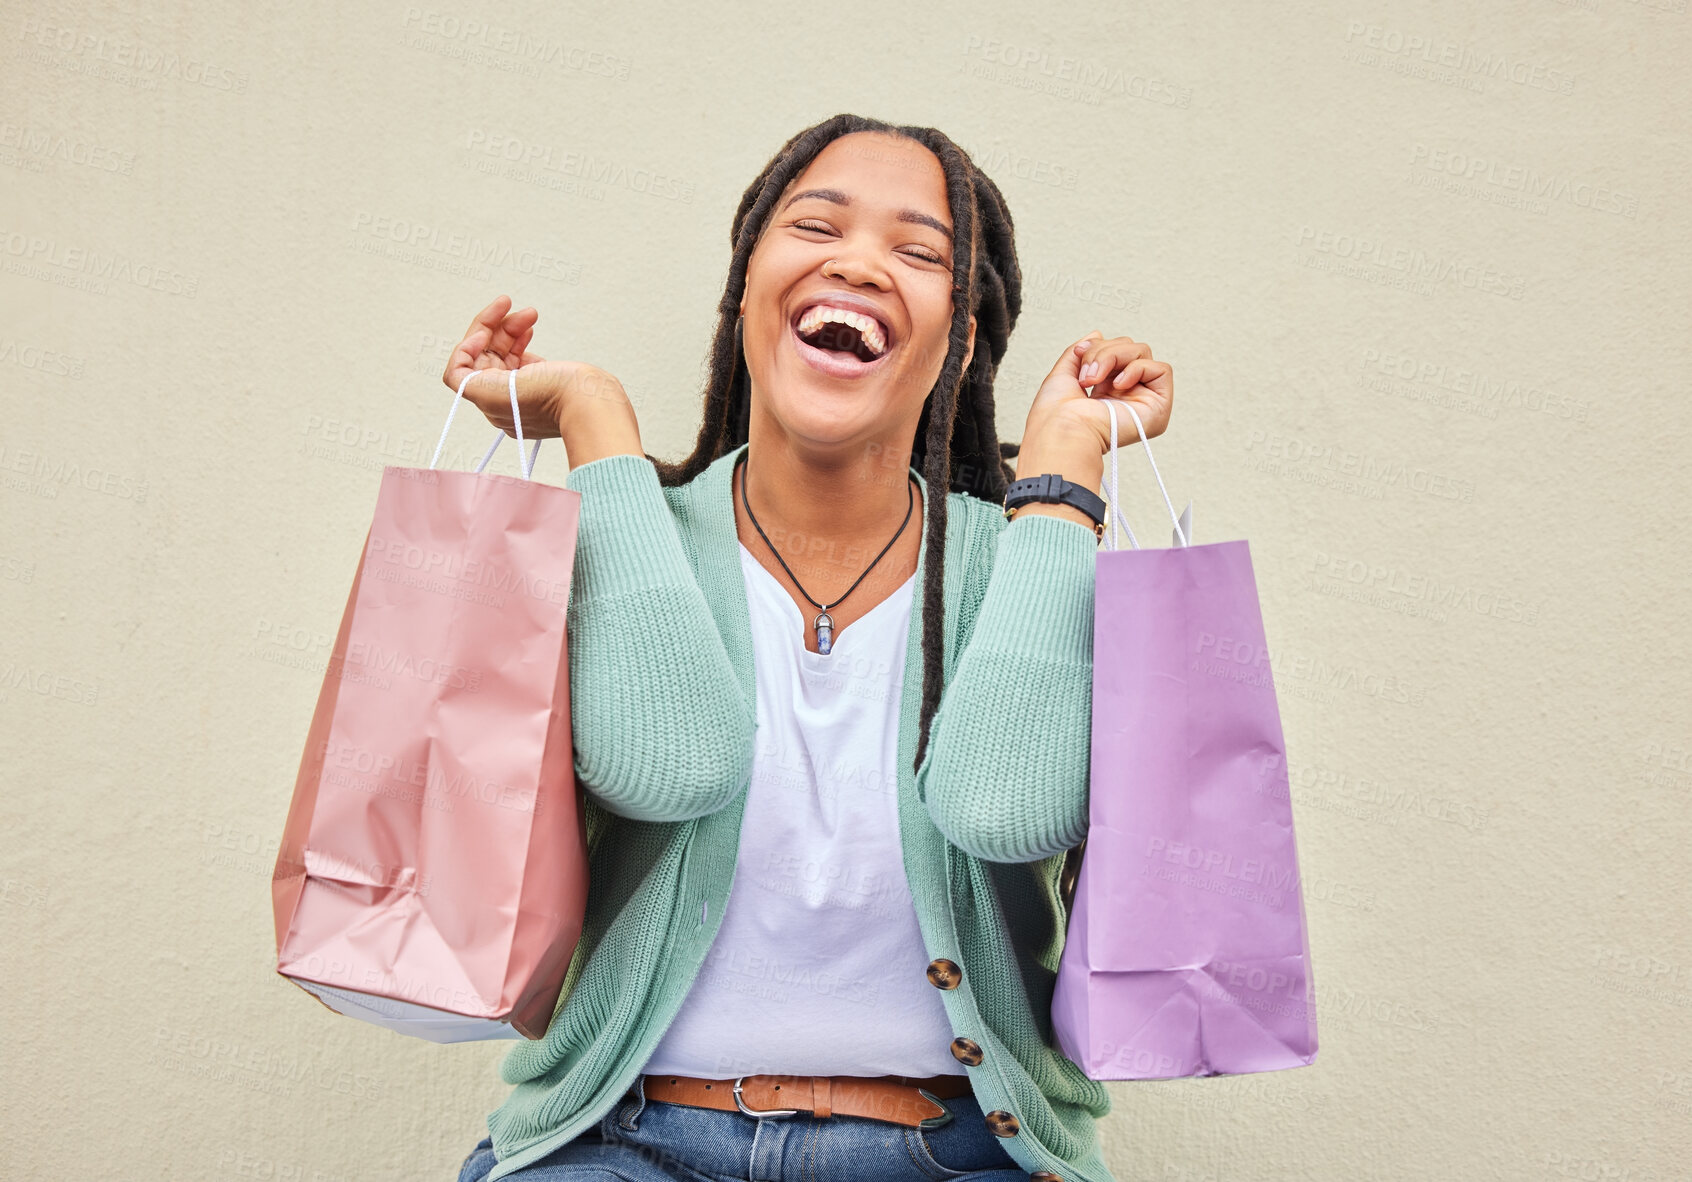 Buy stock photo Fashion, funny or happy black woman with shopping bag, gift or smile in retail therapy with wall mockup. Freedom, relax or excited customer laughing with clothes or products on discounted sales offer